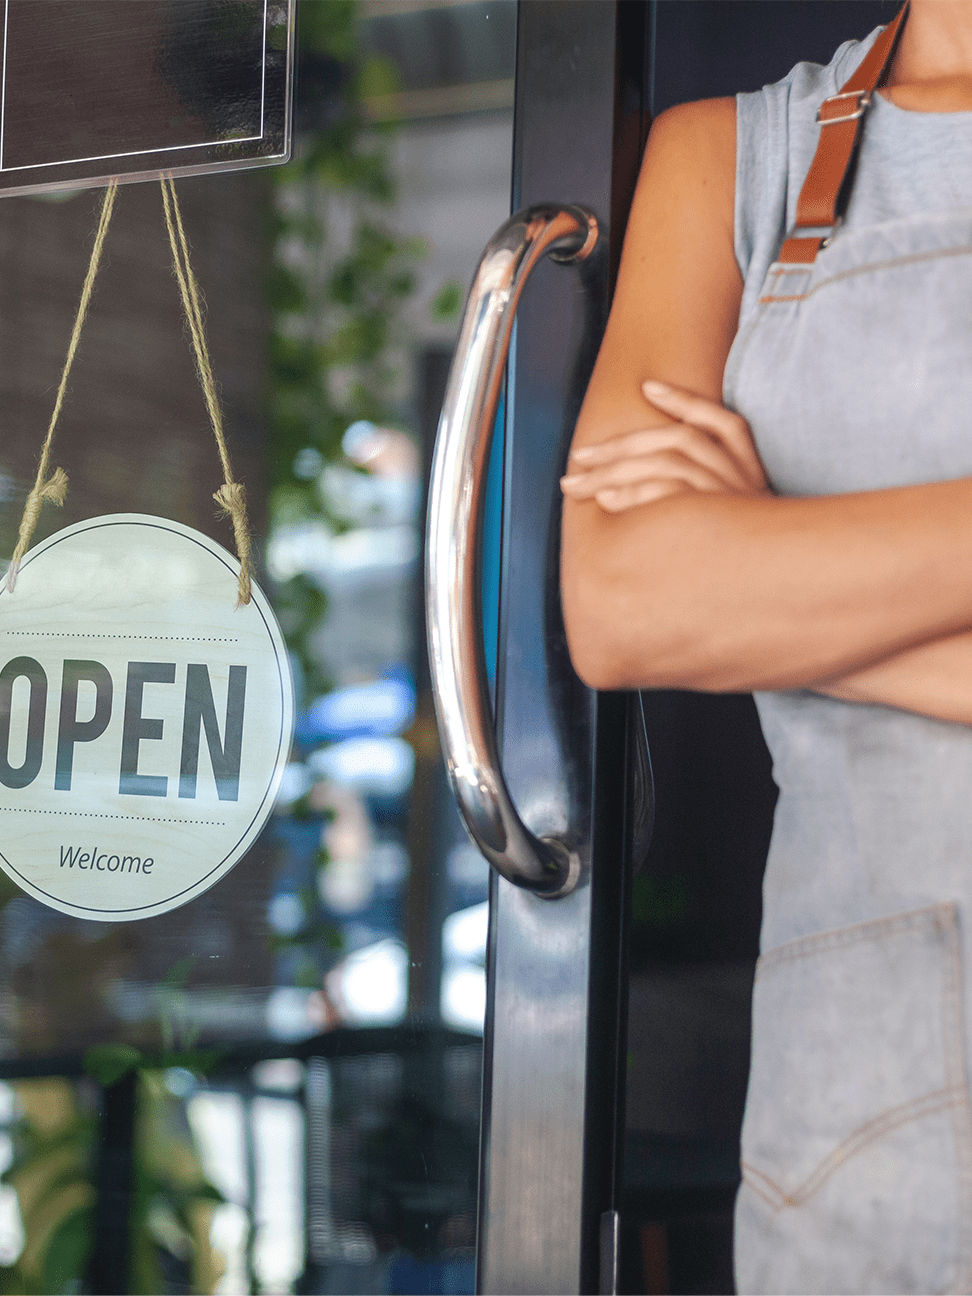 Woman business owner in apron standing by building door with an "open" sign hanging from the window.